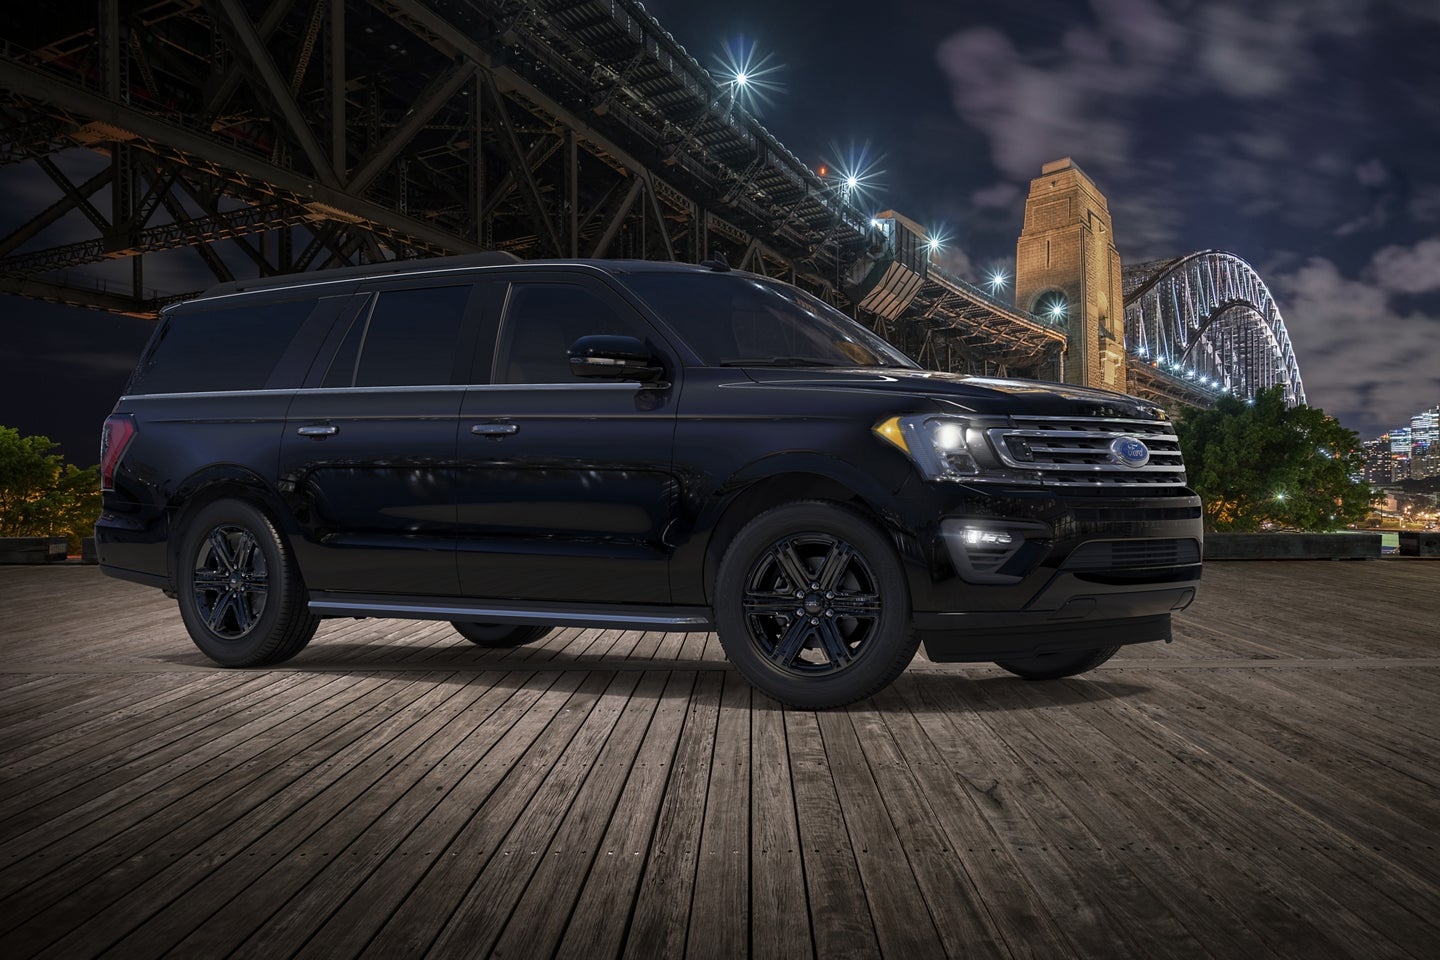 2020 Ford Expedition Lease near Enterprise, AL